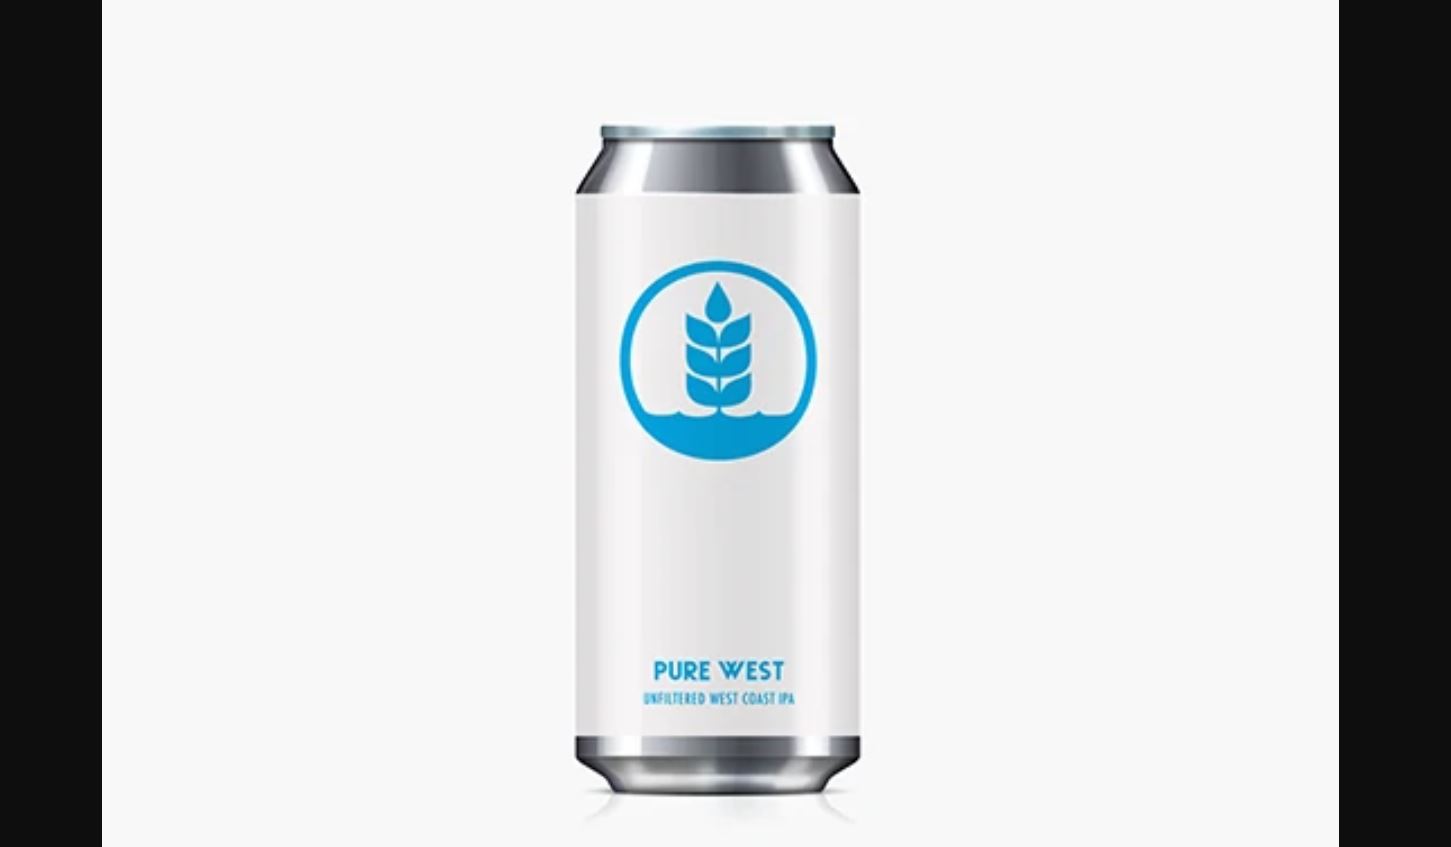 Pure West IPA